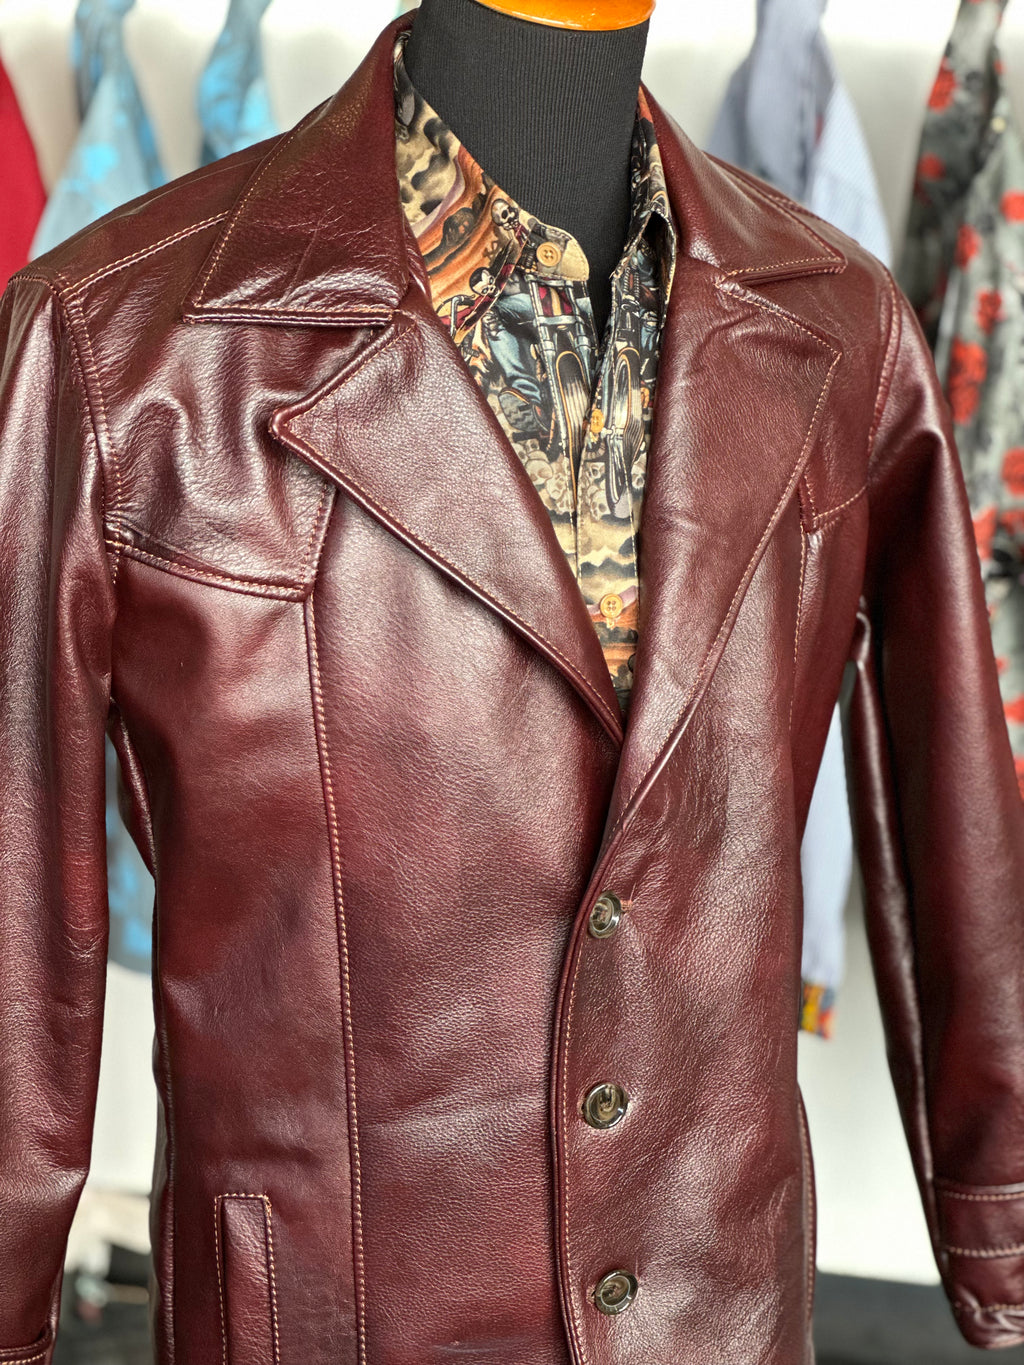 The hit man leather jacket